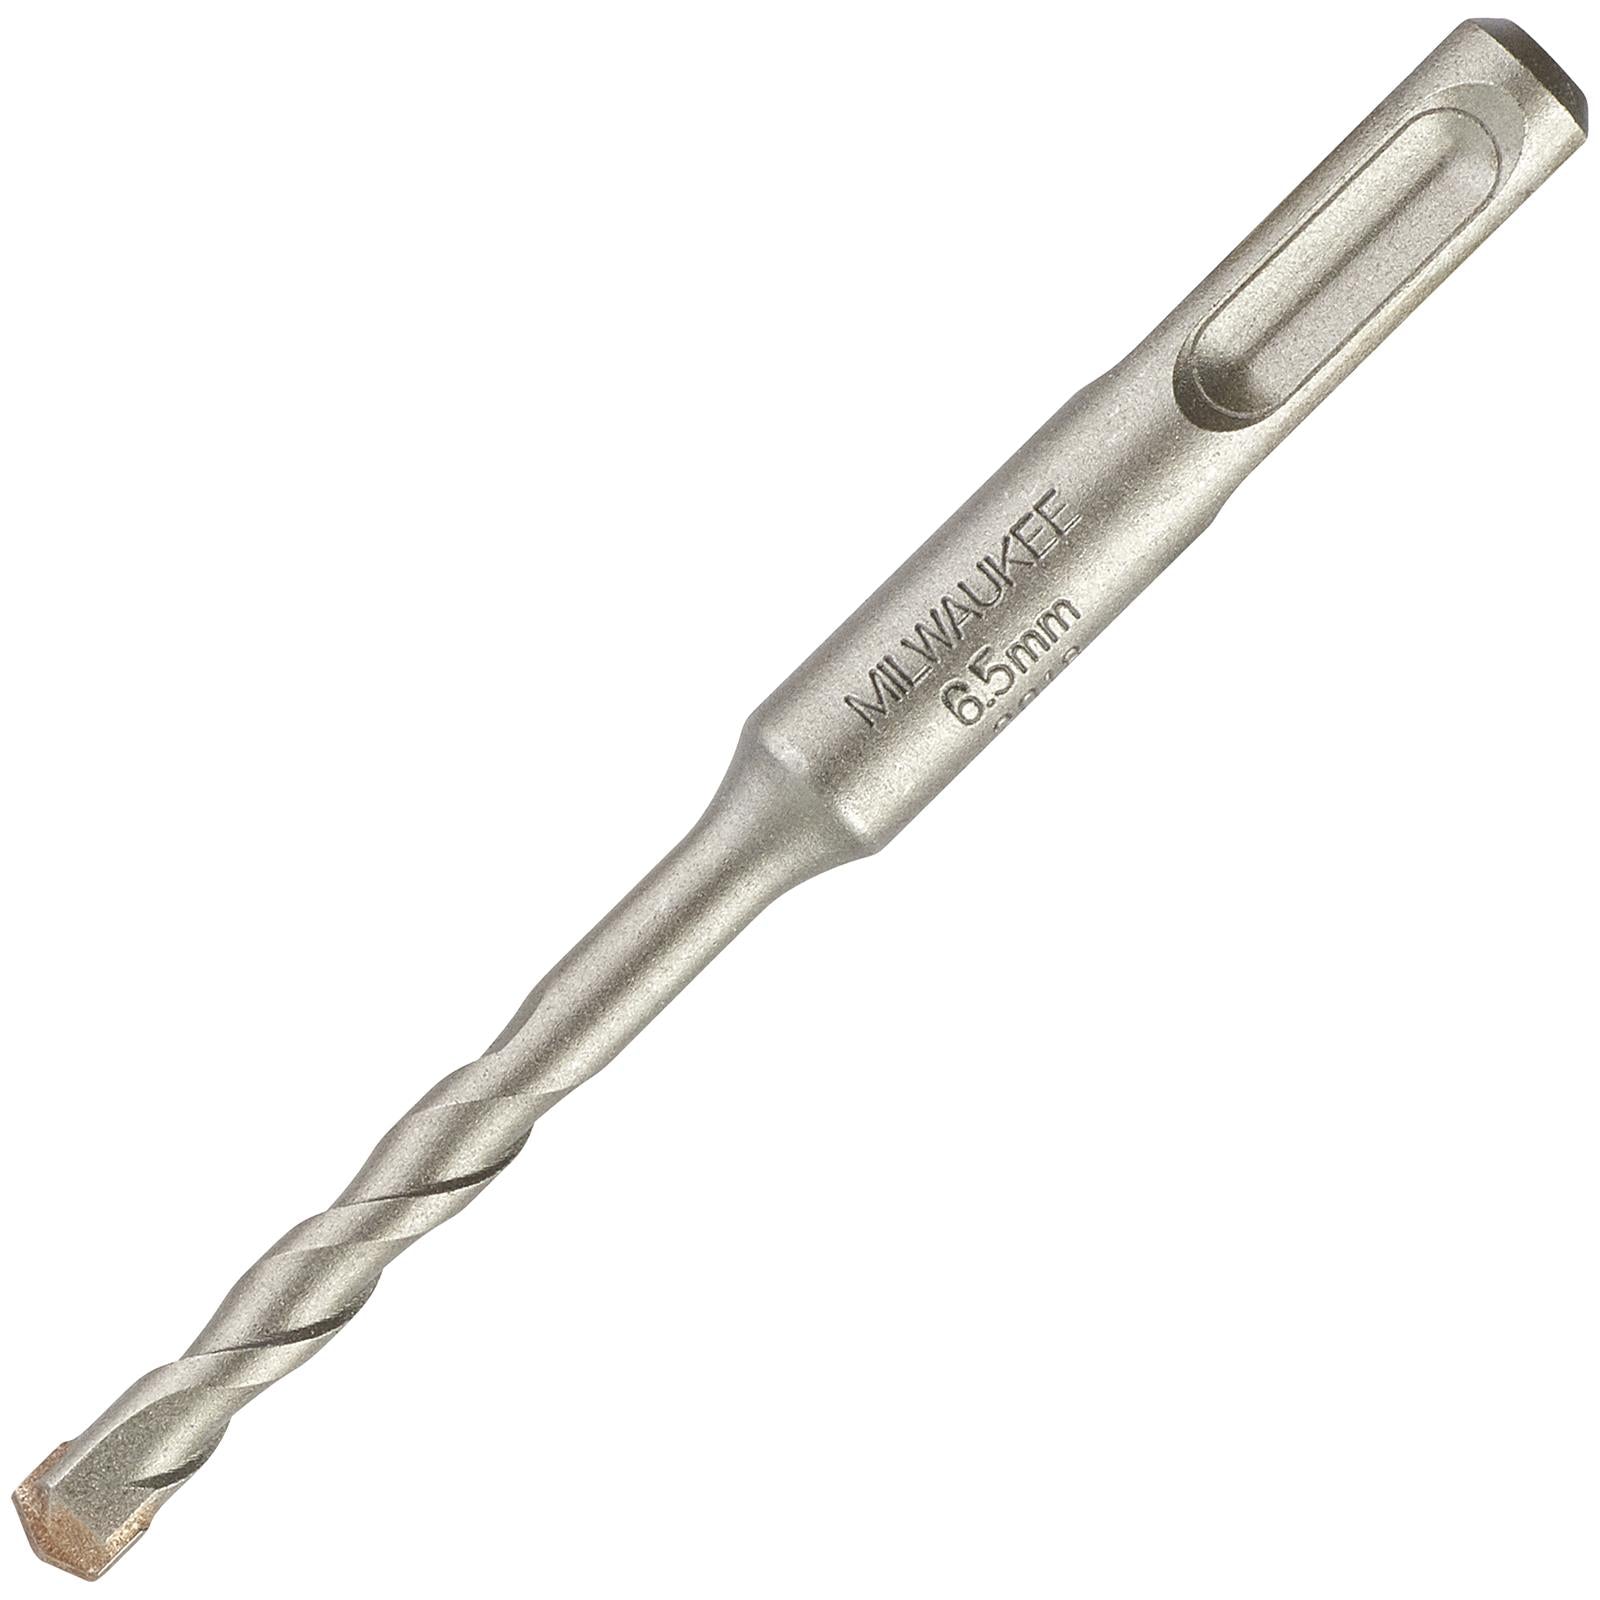 Milwaukee SDS Plus Contractor Hammer Drill Bits 2 Cut